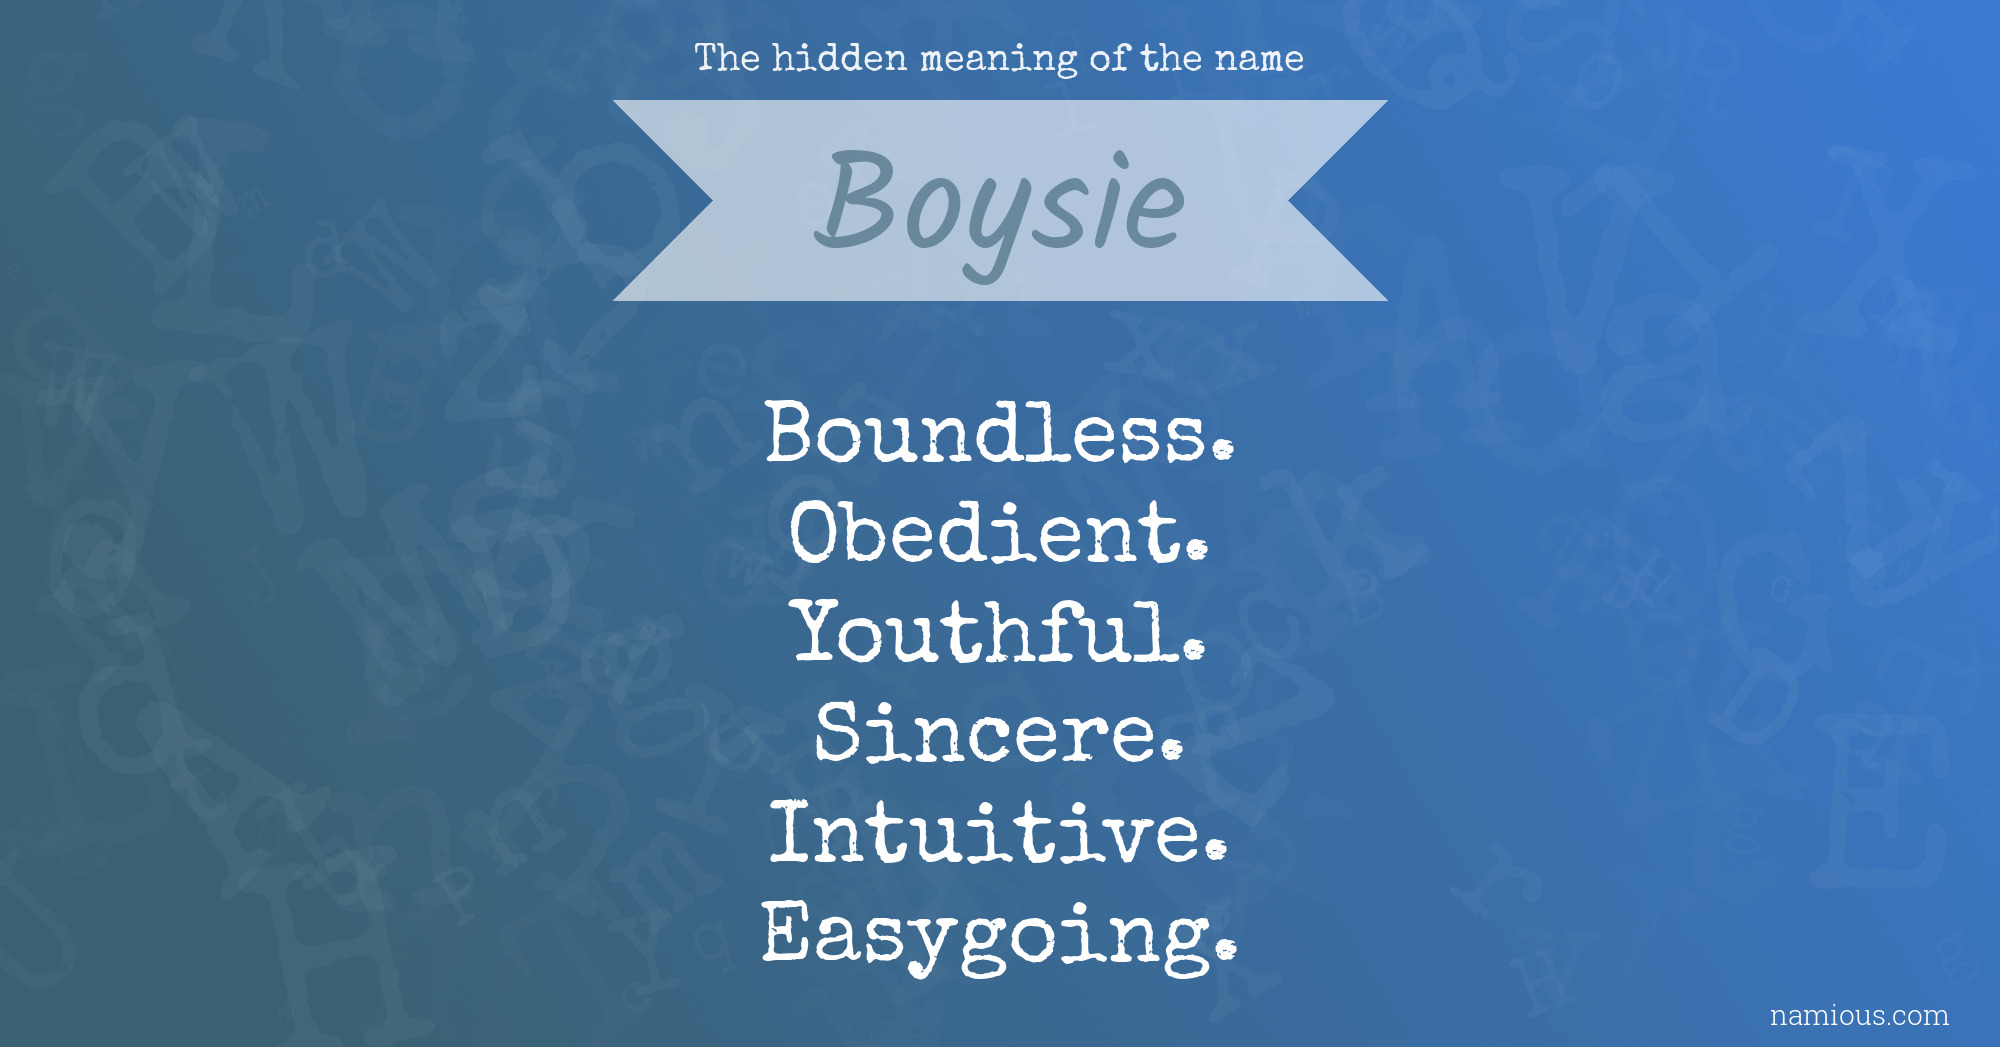 The hidden meaning of the name Boysie